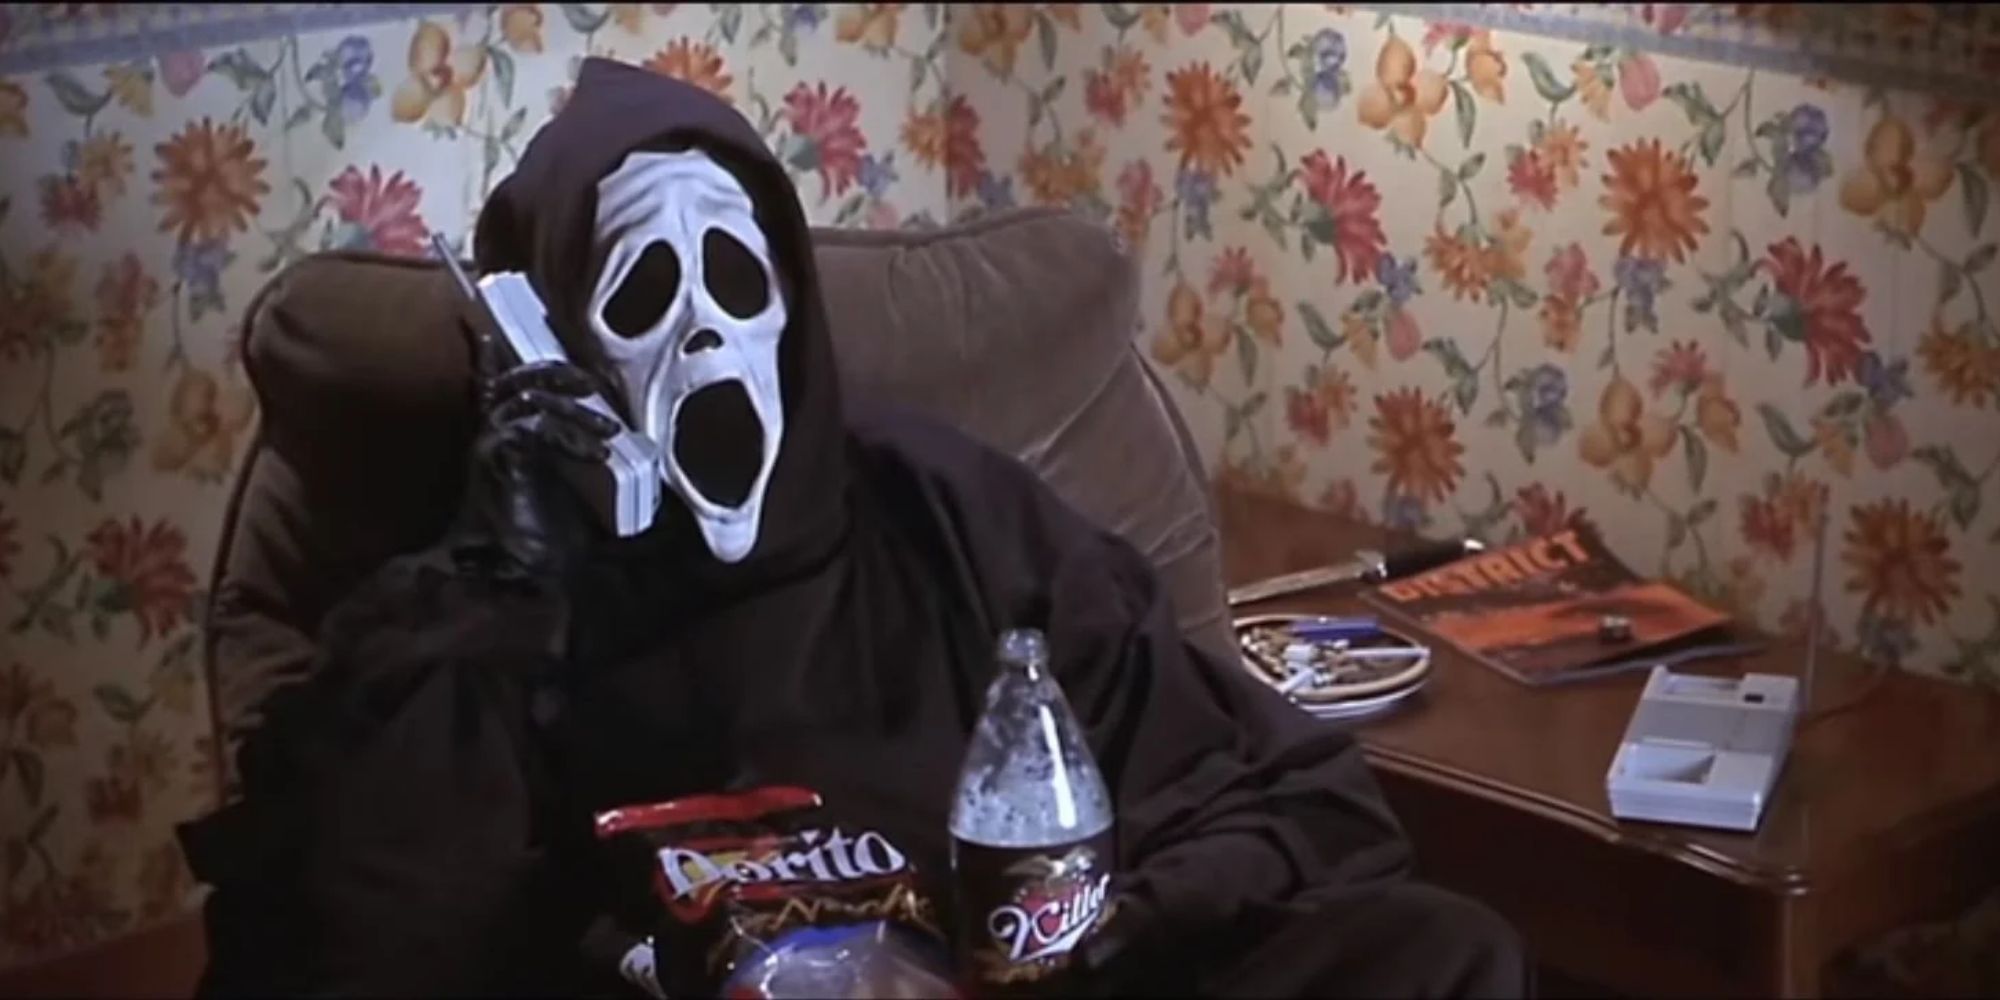 The masked killer from 'Scary Movie' sits on a sofa, talking on the phone with corn chips and soda in his lap.